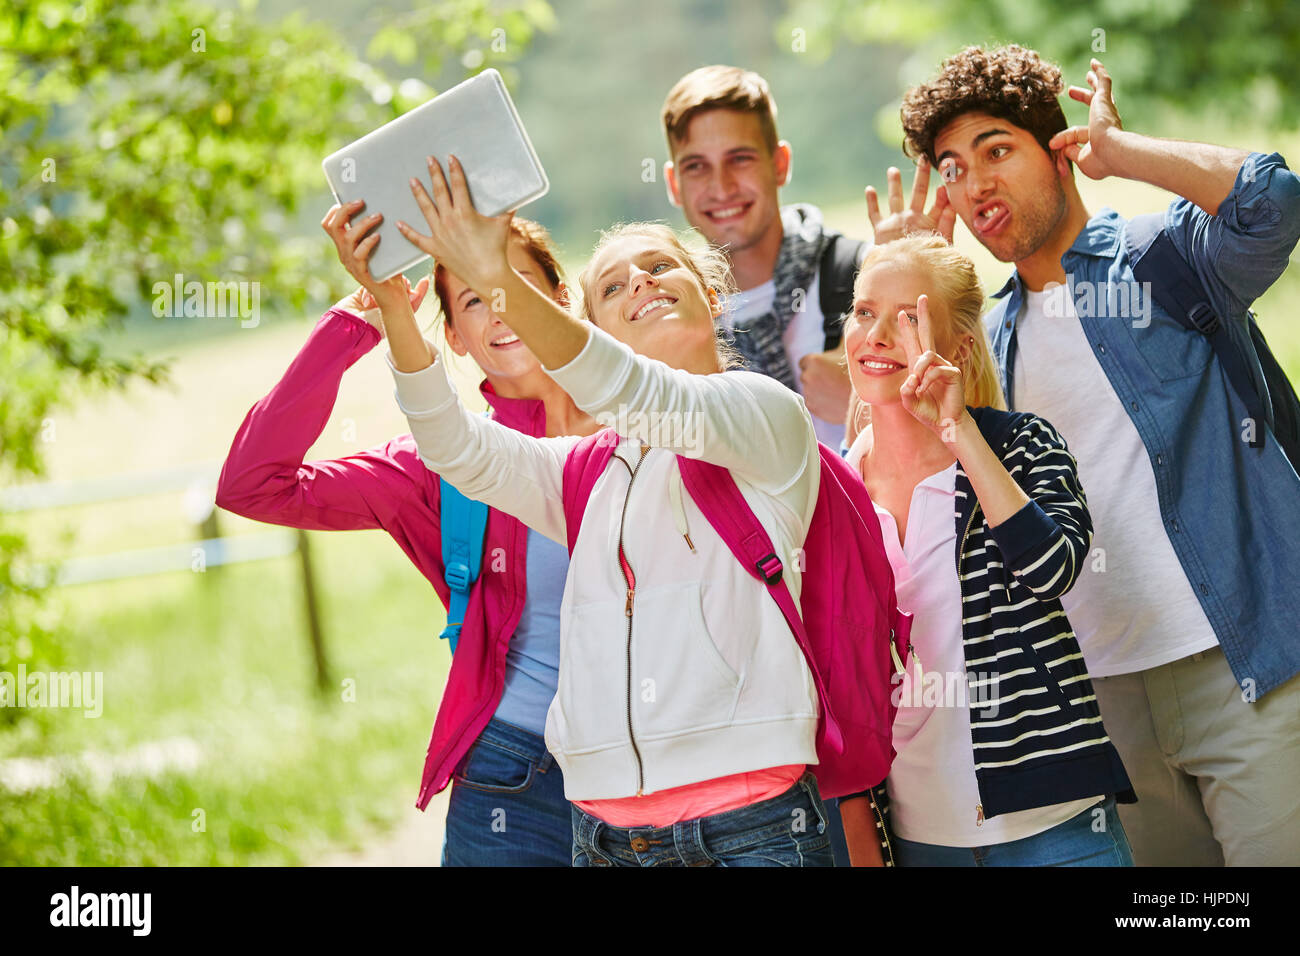 Group of young people having fun and taking a selfie being silly Stock Photo